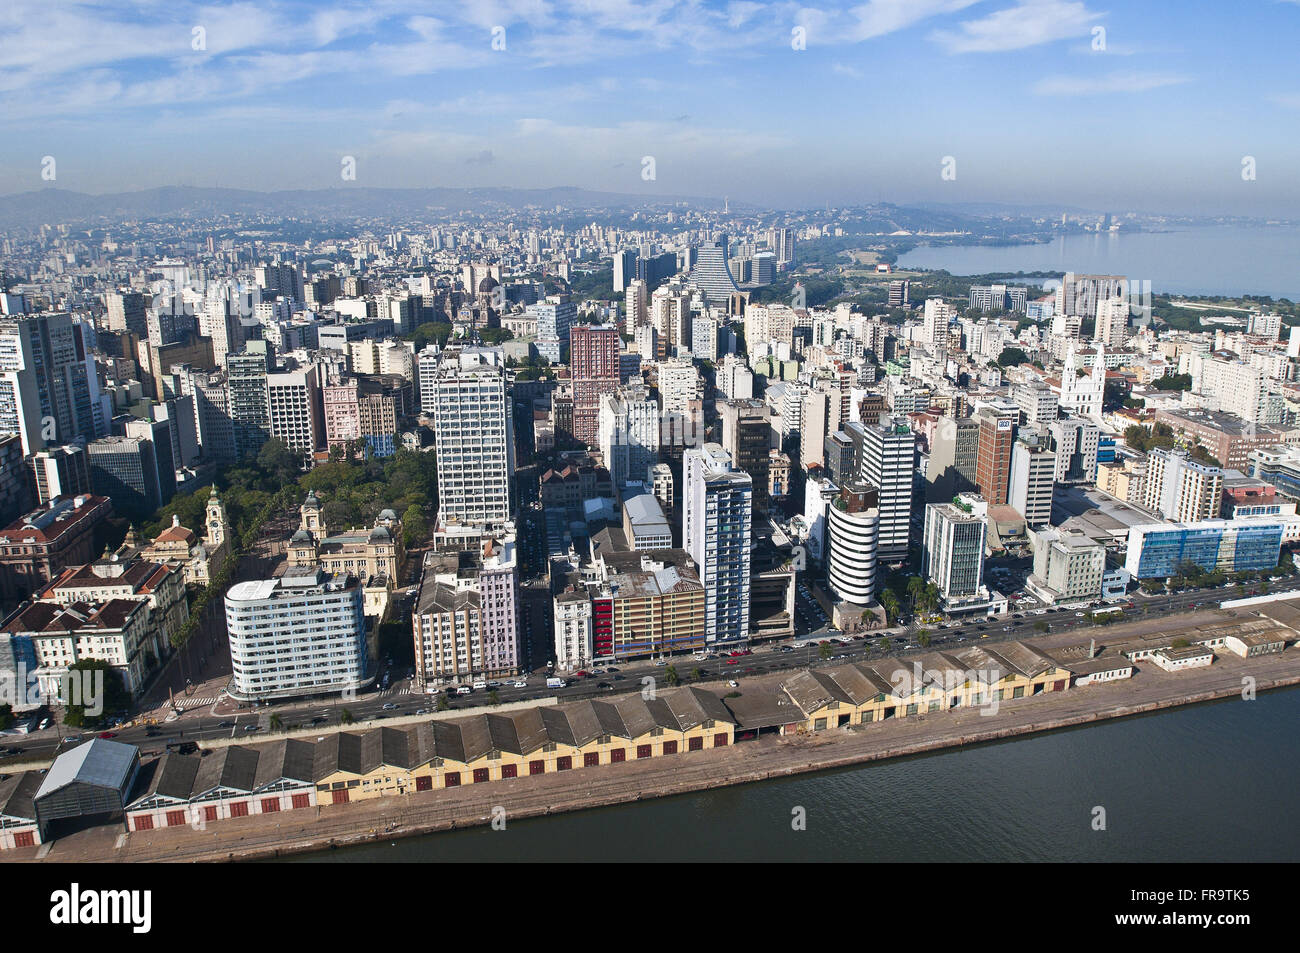 Aerial view of the port area on the banks of the Guaiba River and city in the background Stock Photo